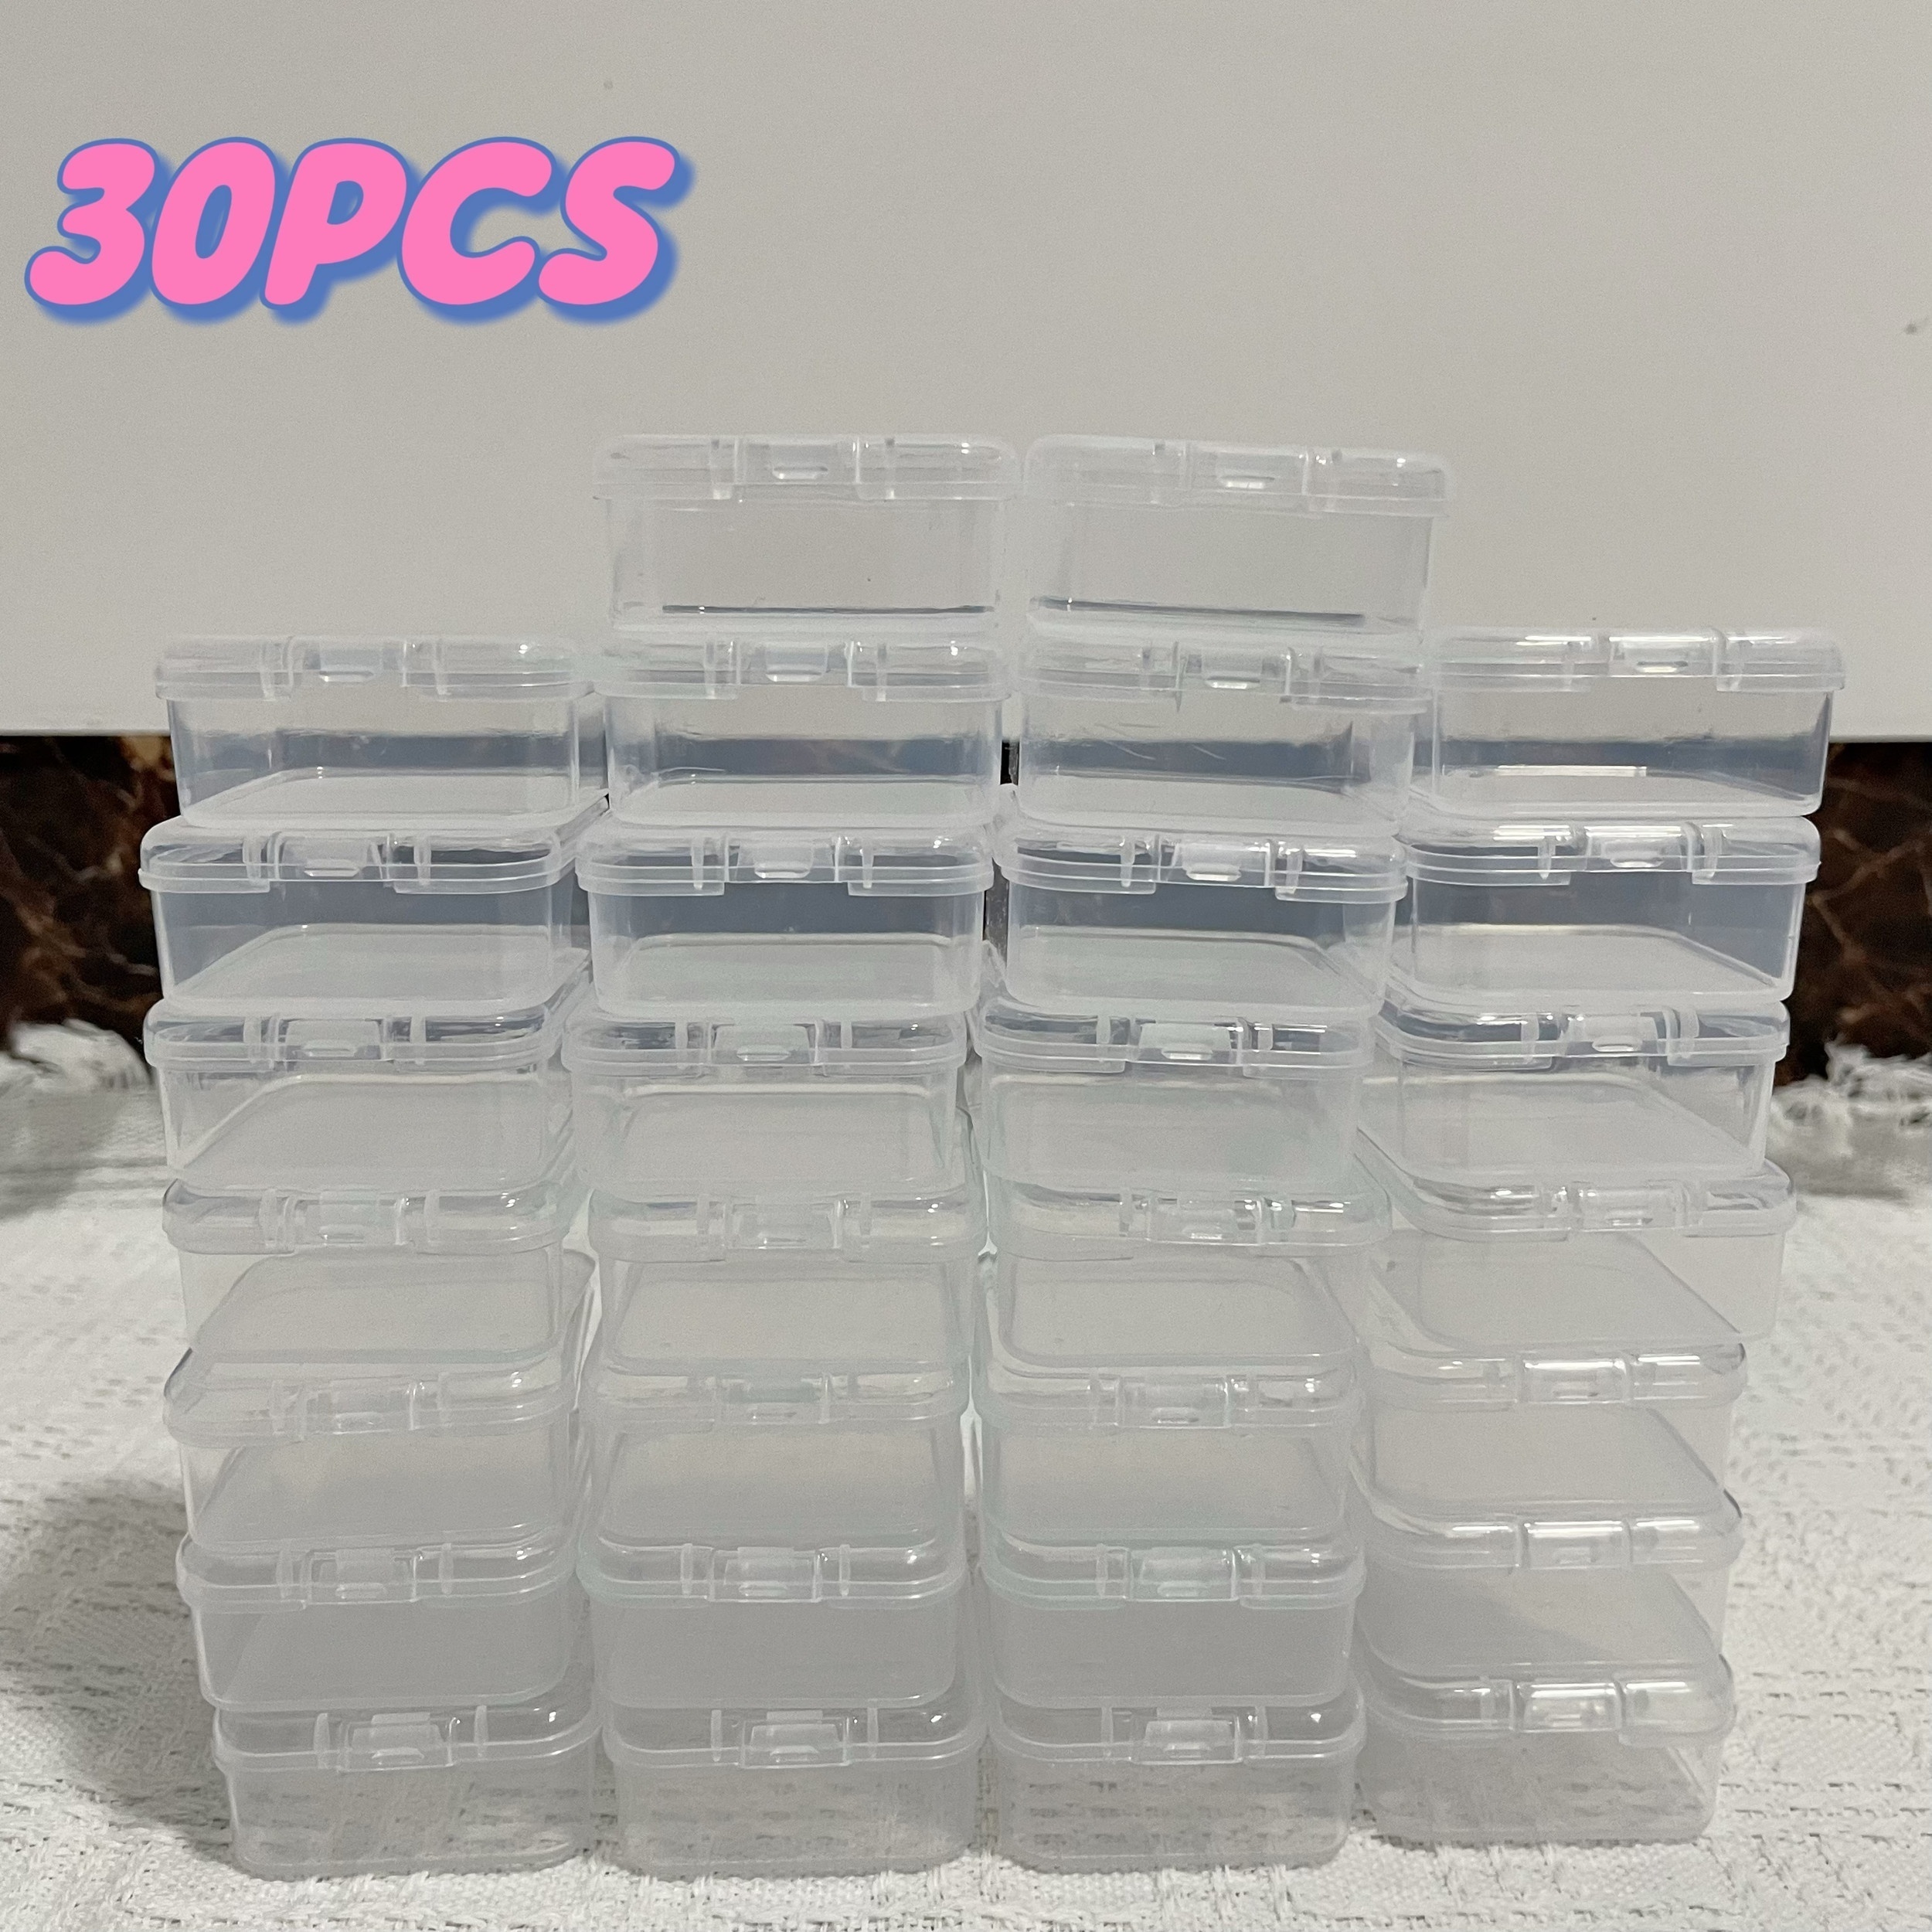 

30pcs Small Clear Storage Box, Portable Multiuse Storage Case, Jewelry Storage Packaging Case, Travel Dustproof Organizer Case For Jewelry Earrings Rings Necklaces Bracelets Pendants Mini Items